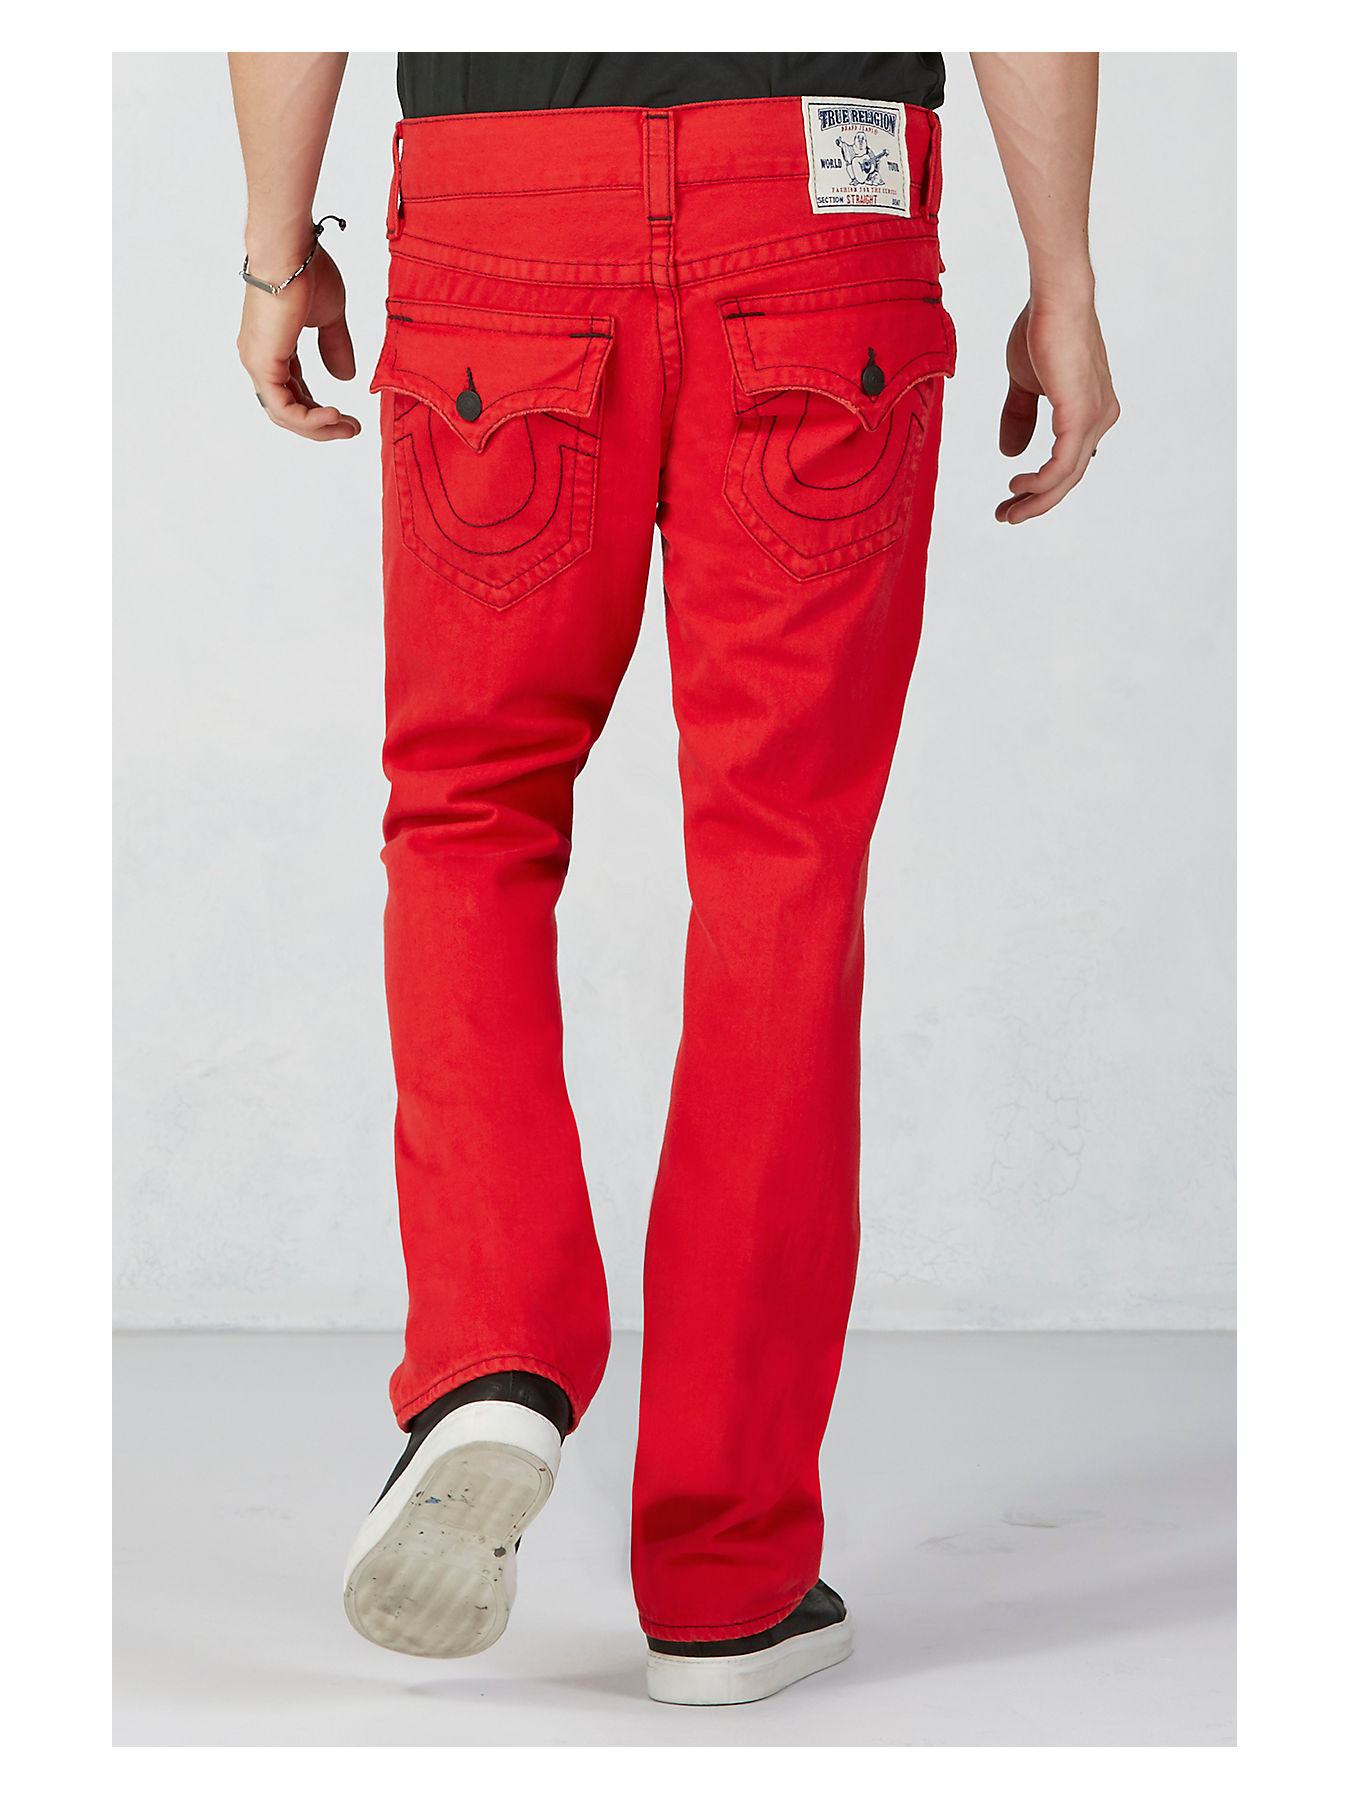 HAND PICKED STRAIGHT MENS RED JEANS - True Religion